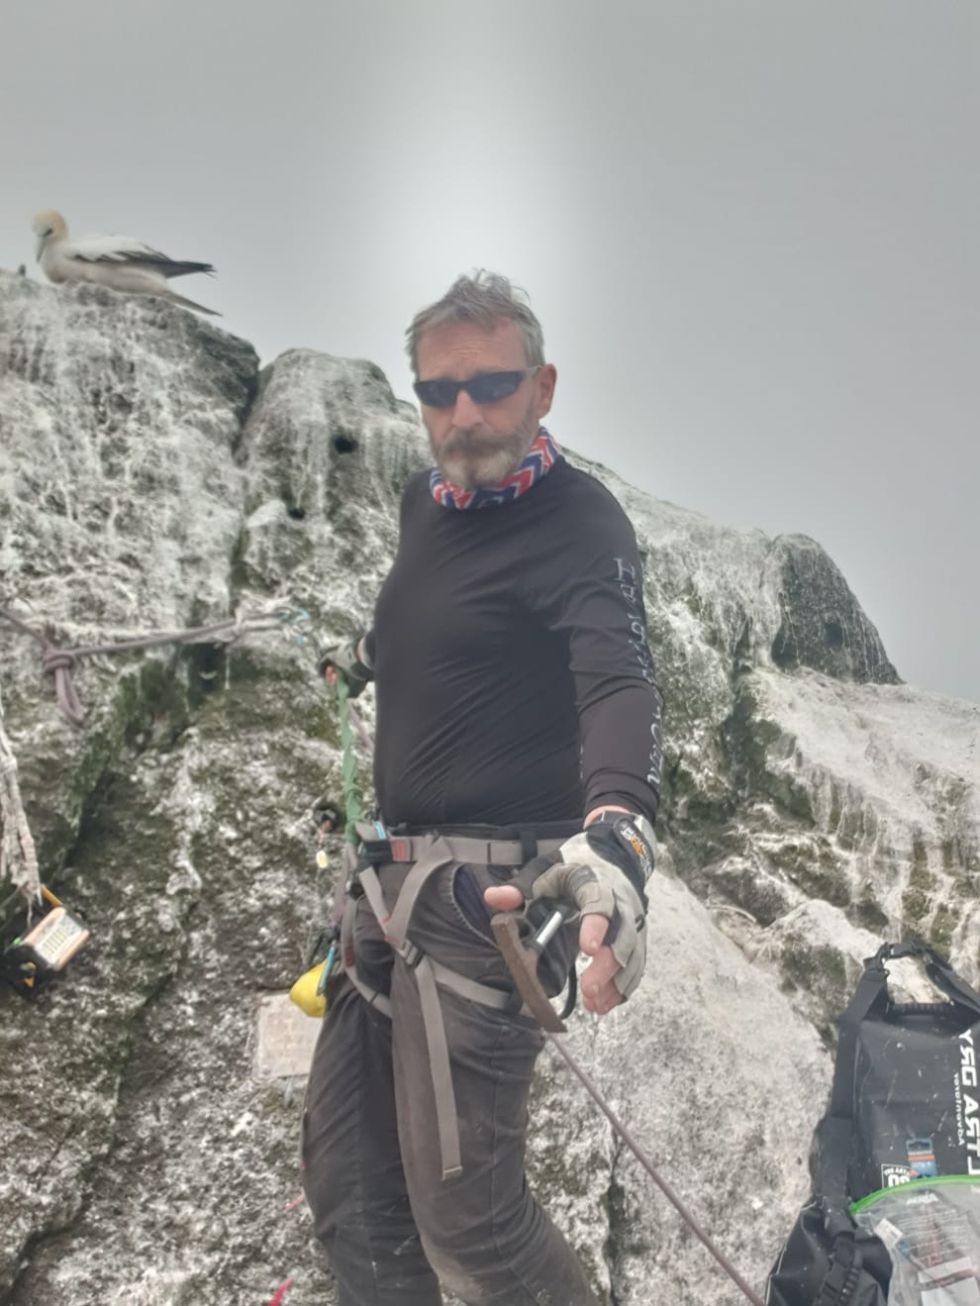 Adventurer ‘on home stretch’ in bid to beat record for longest stay on Rockall